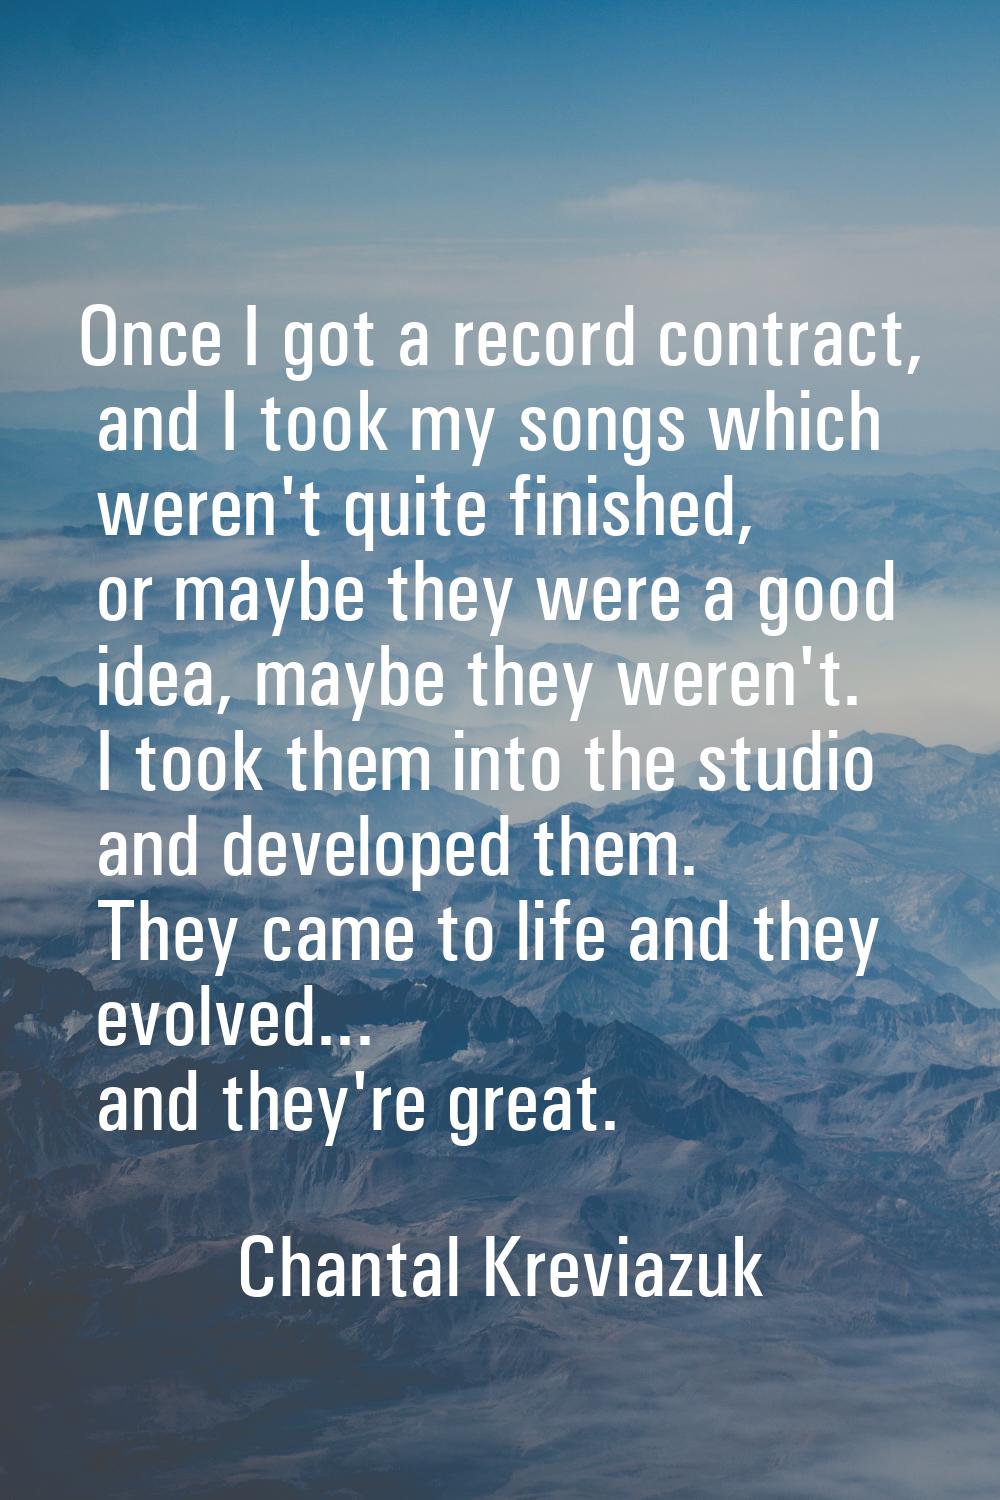 Once I got a record contract, and I took my songs which weren't quite finished, or maybe they were 